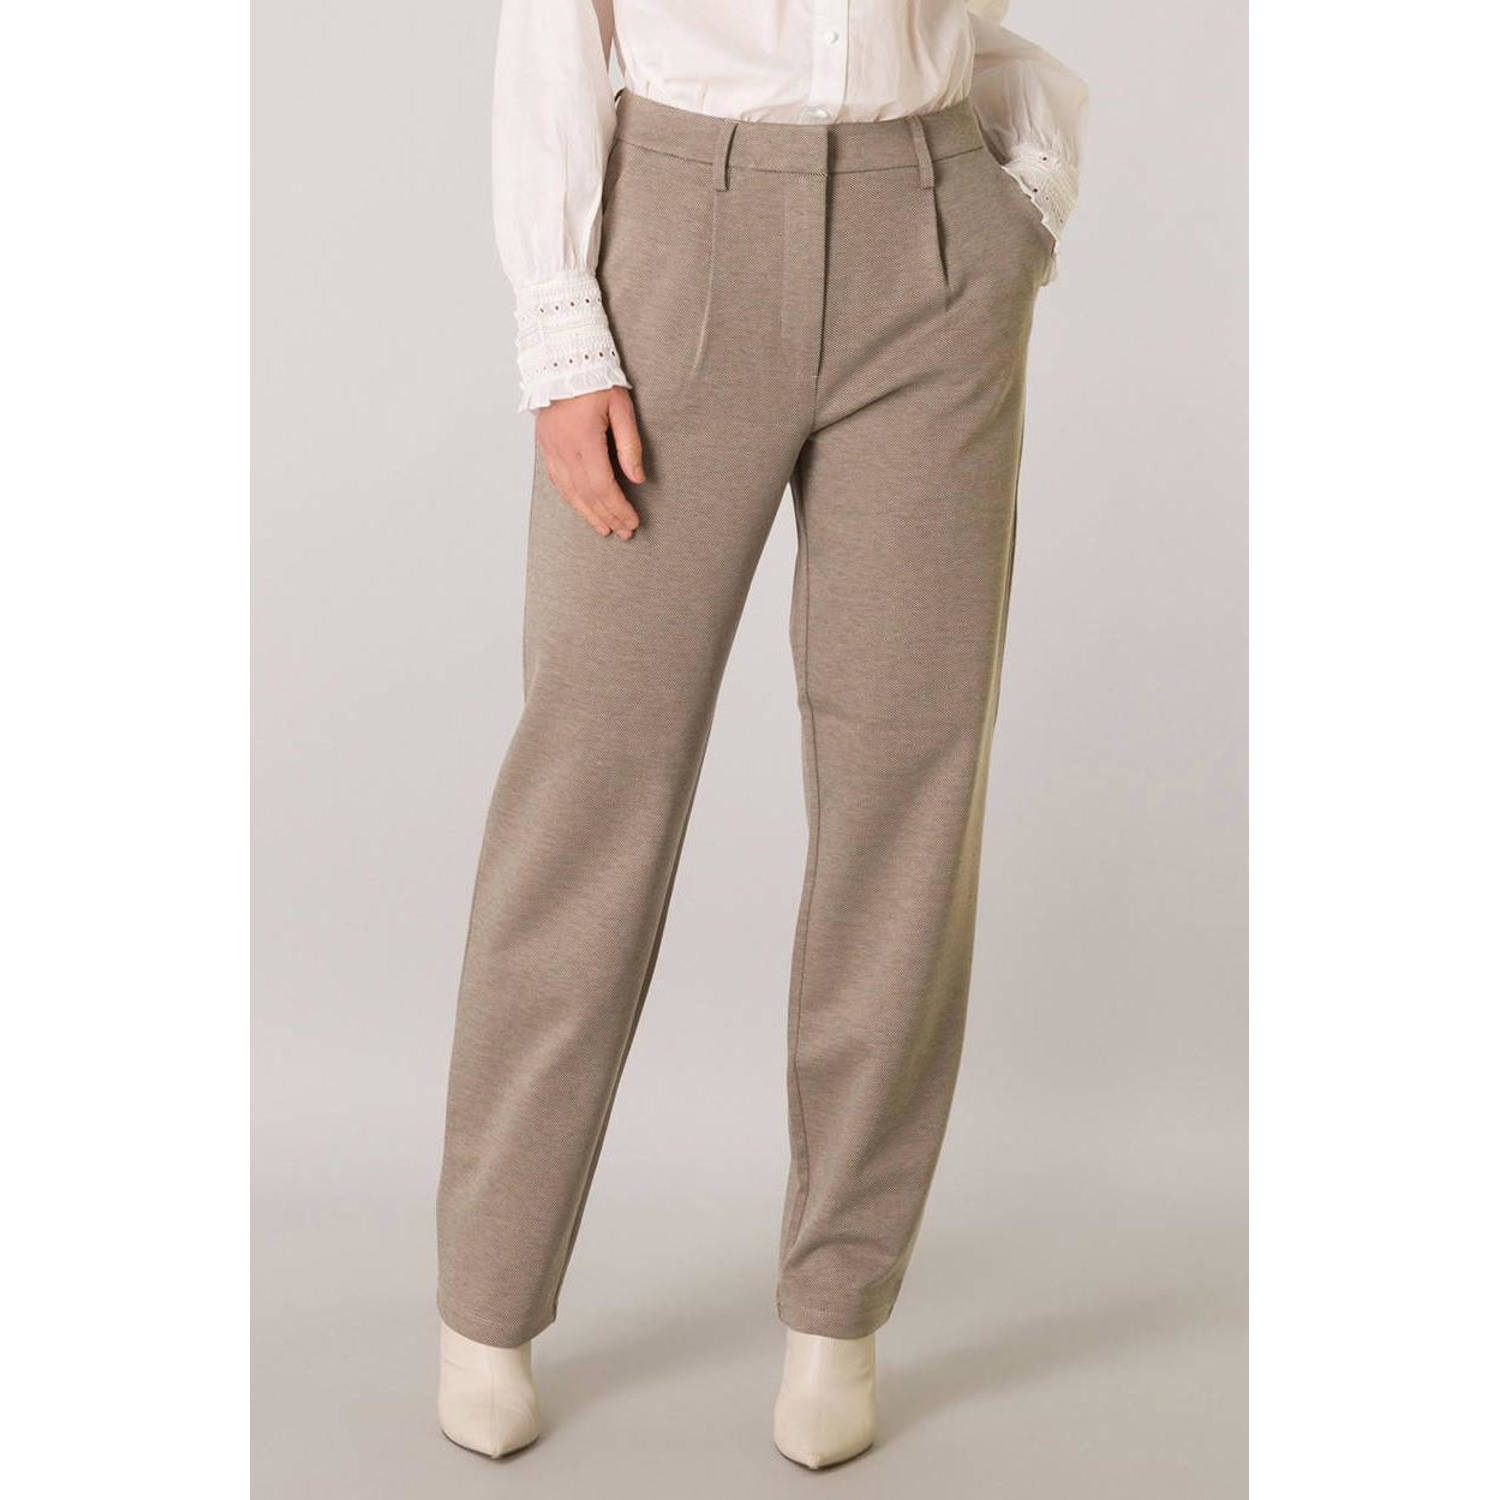 Yest straight fit pantalon taupe